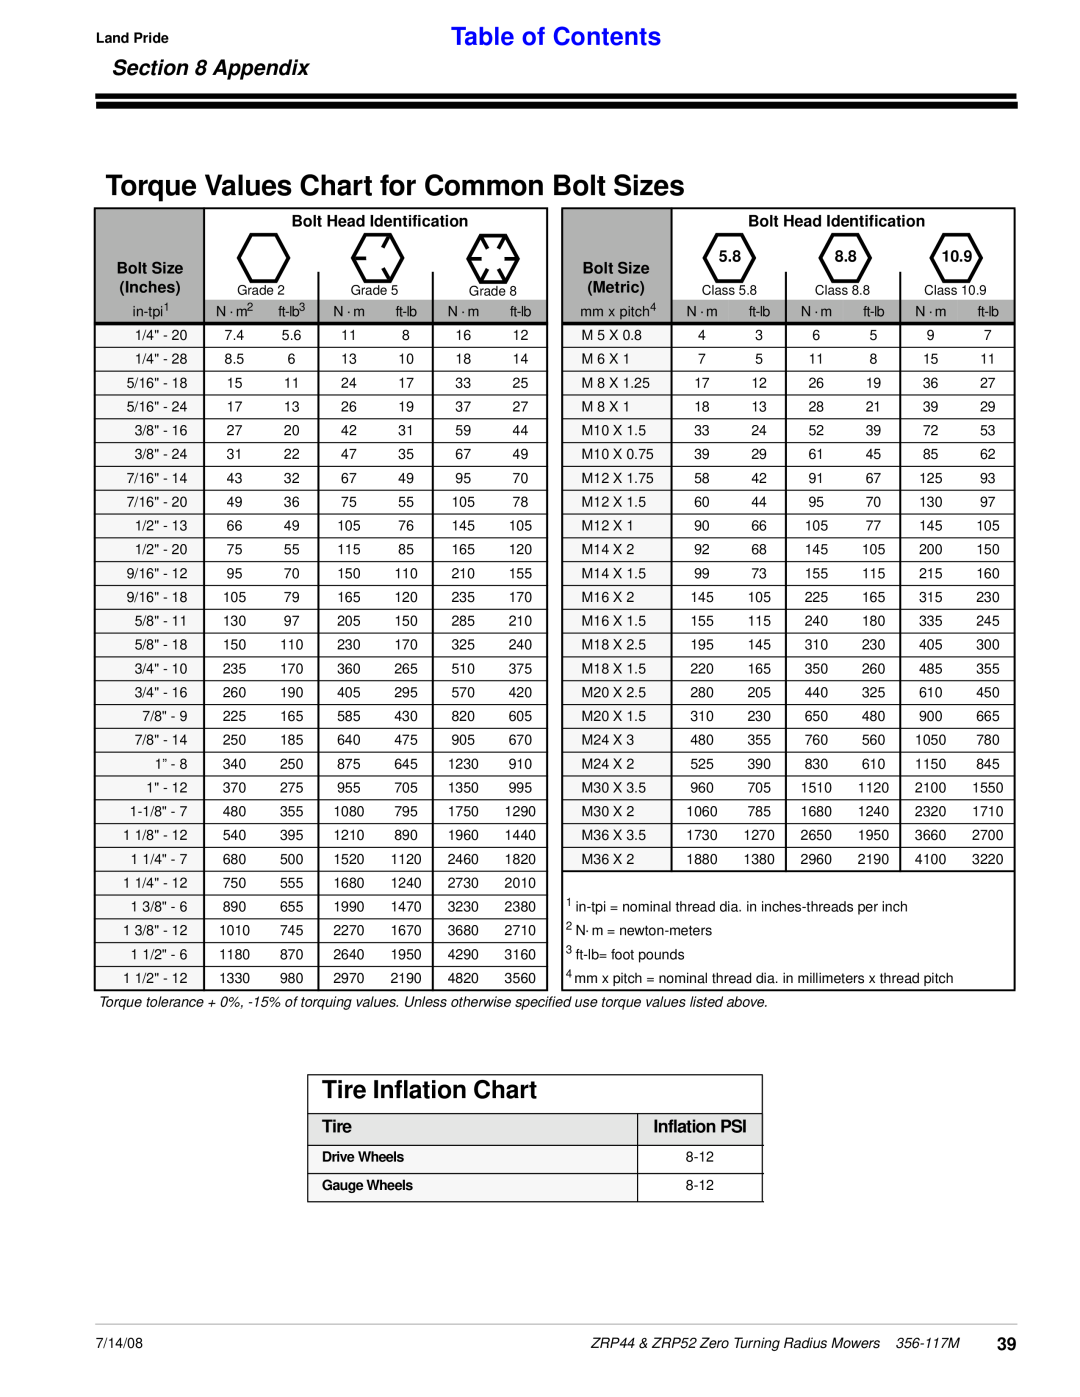 Land Pride ZRP44, ZRP52 manual Torque Values Chart for Common Bolt Sizes, Appendix, Table of Contents, Tire Inflation Chart 